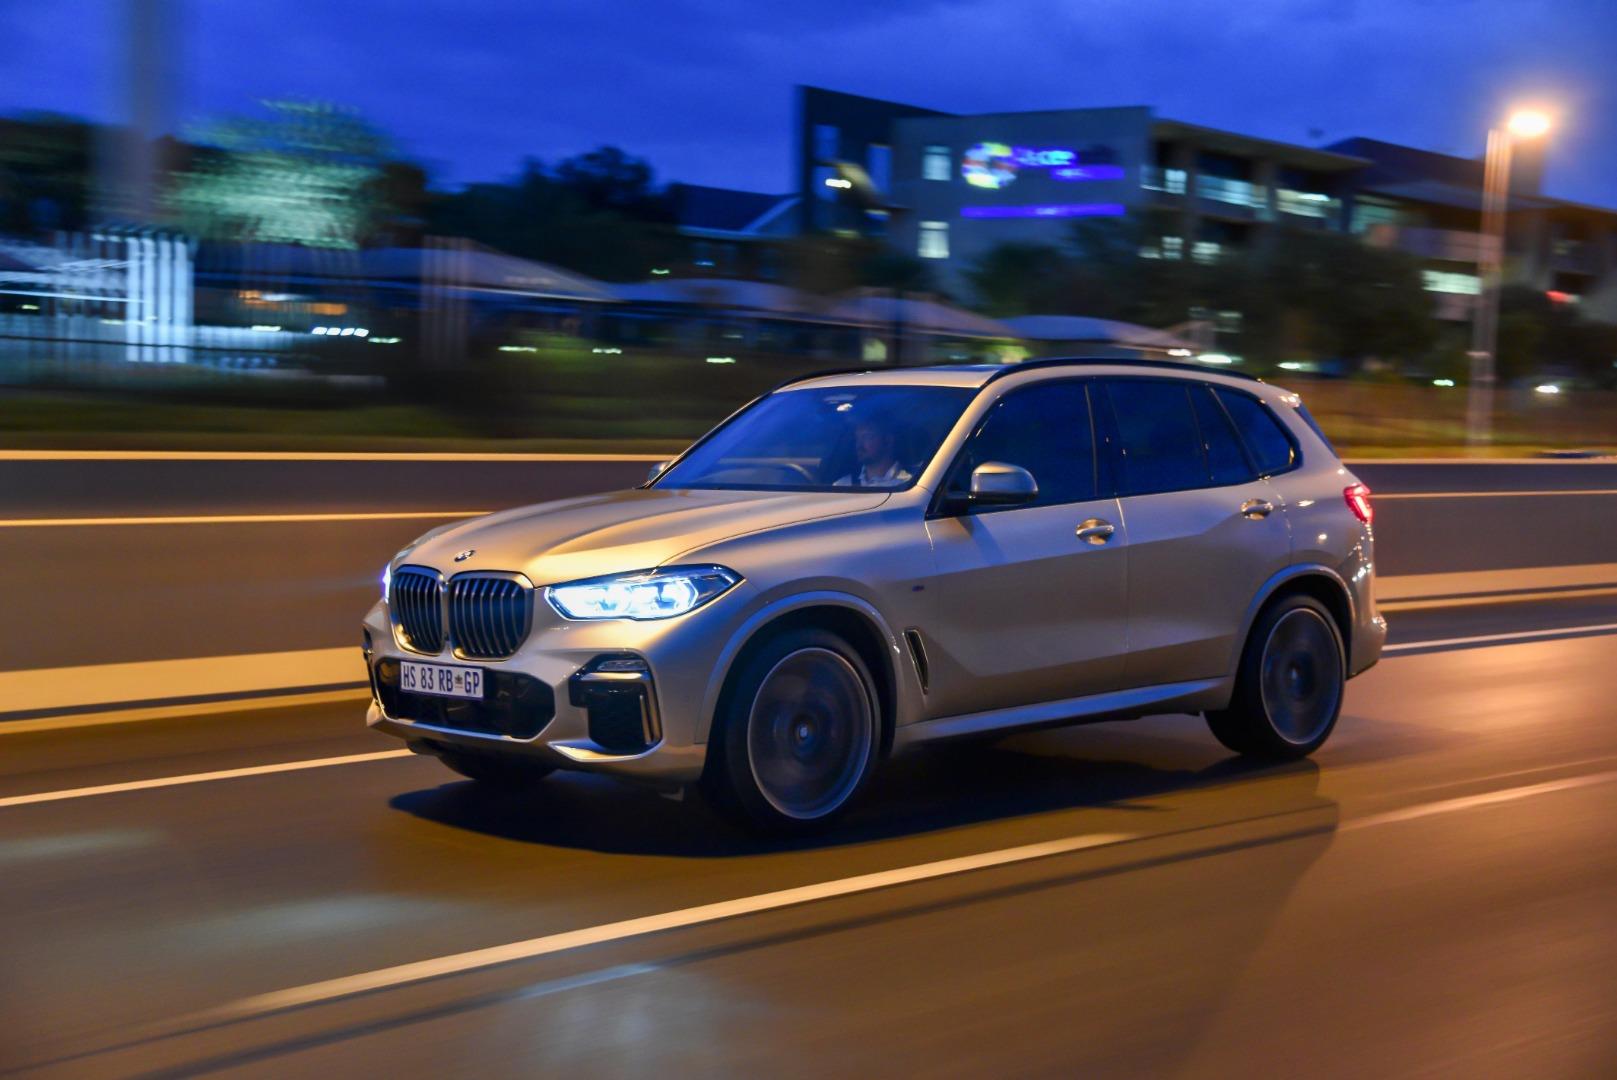 New vs old BMW X5: what are top 4 differences? - Motoring News and